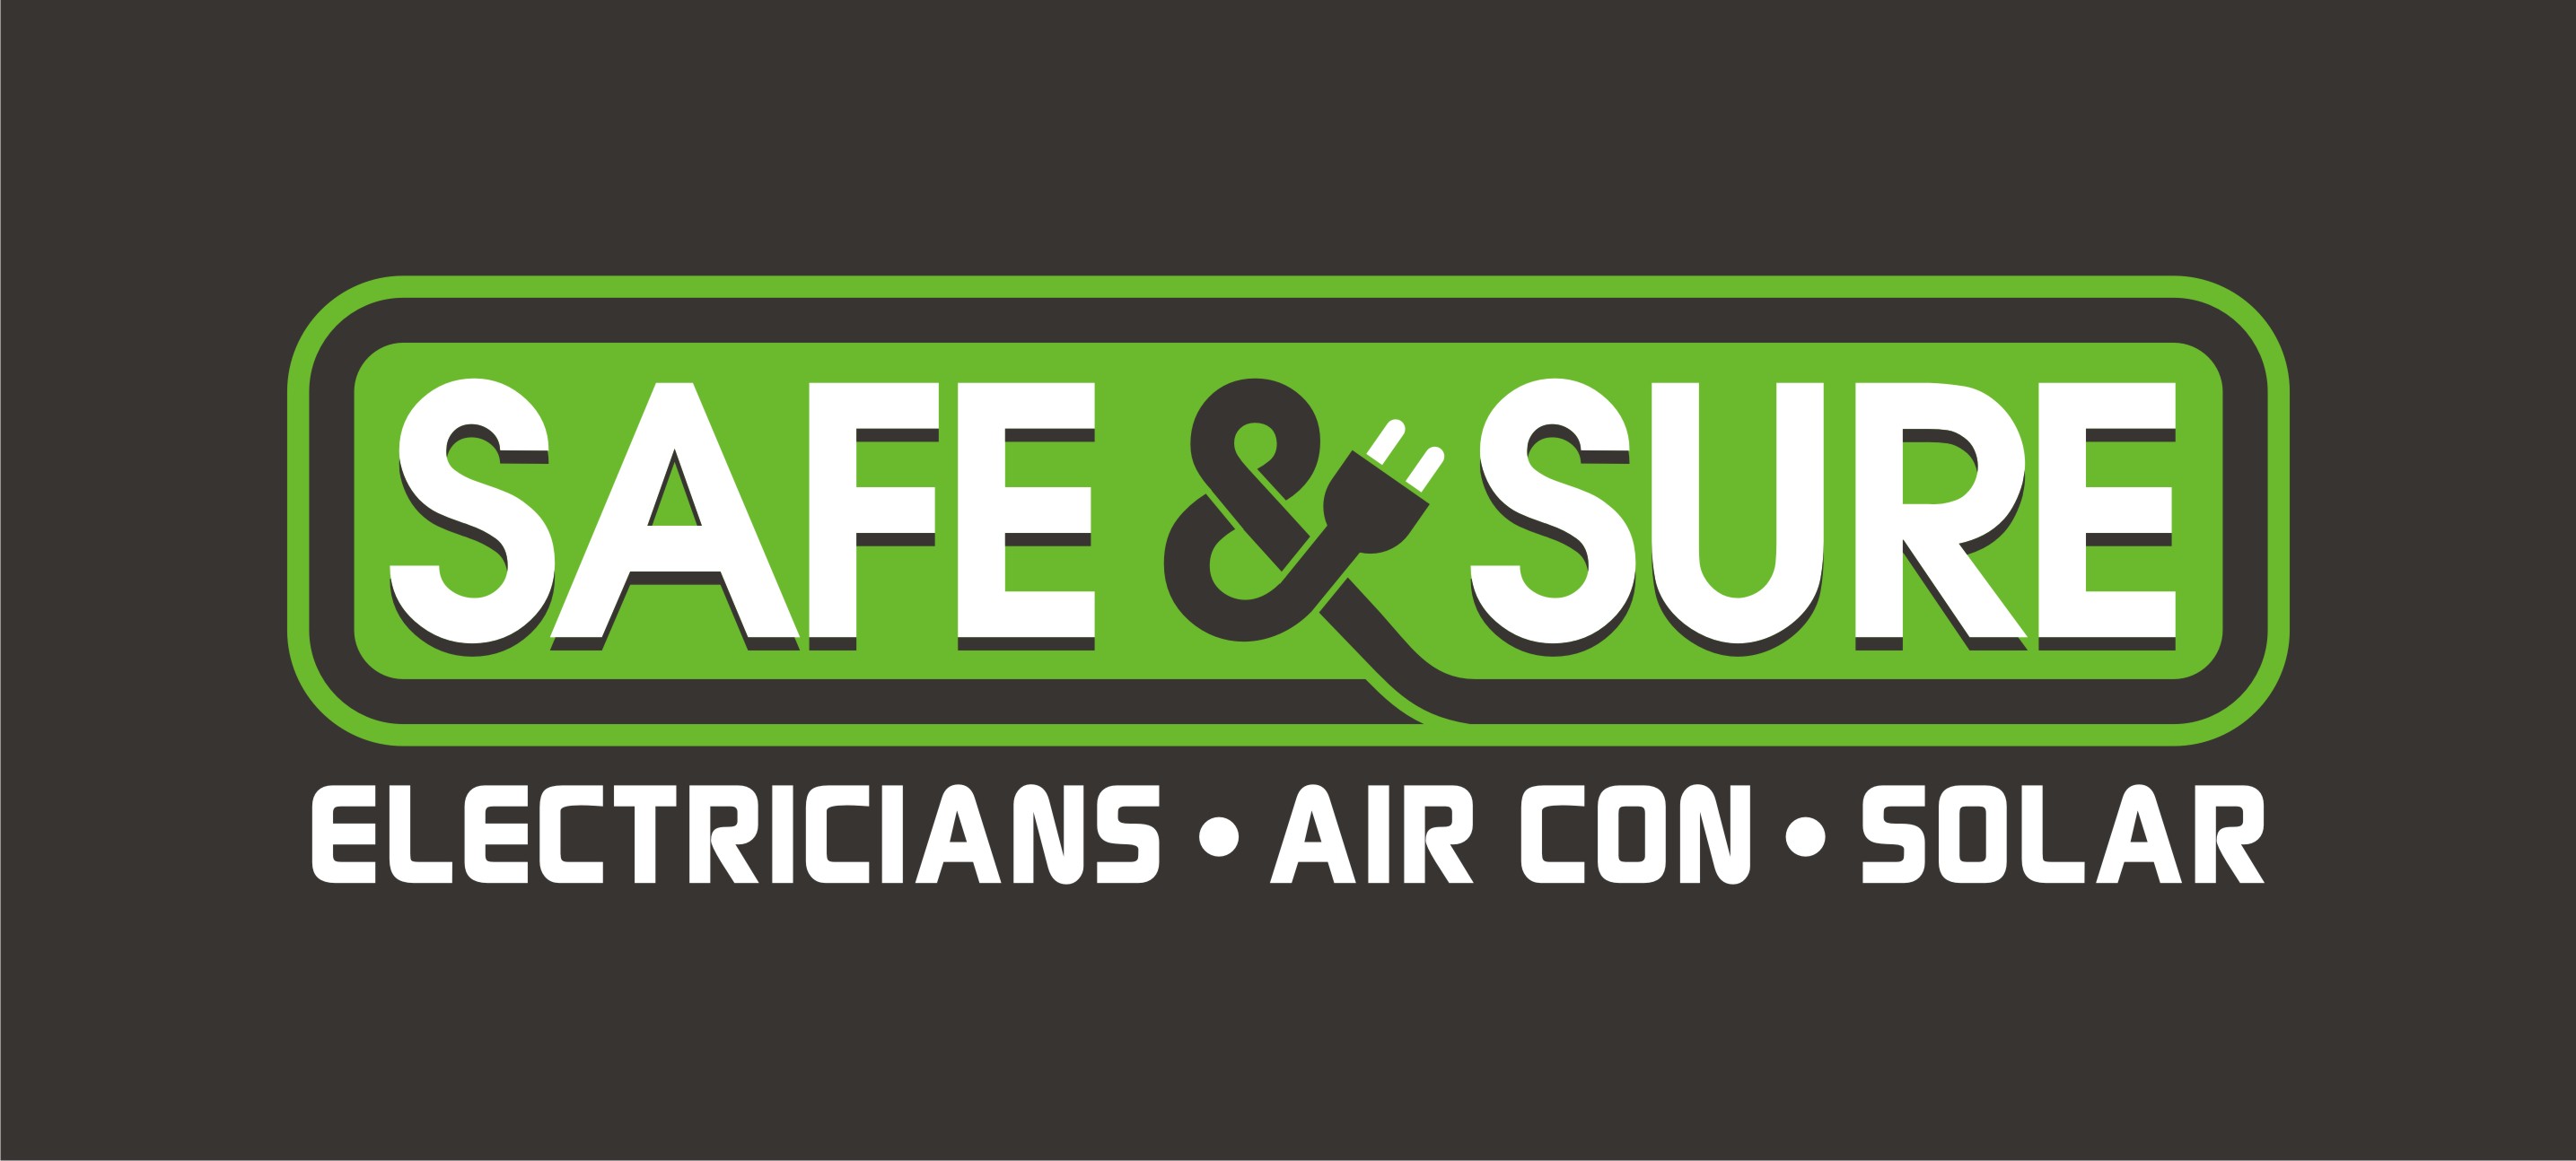 Safe & Sure Electricians, Air Conditioning, Solar